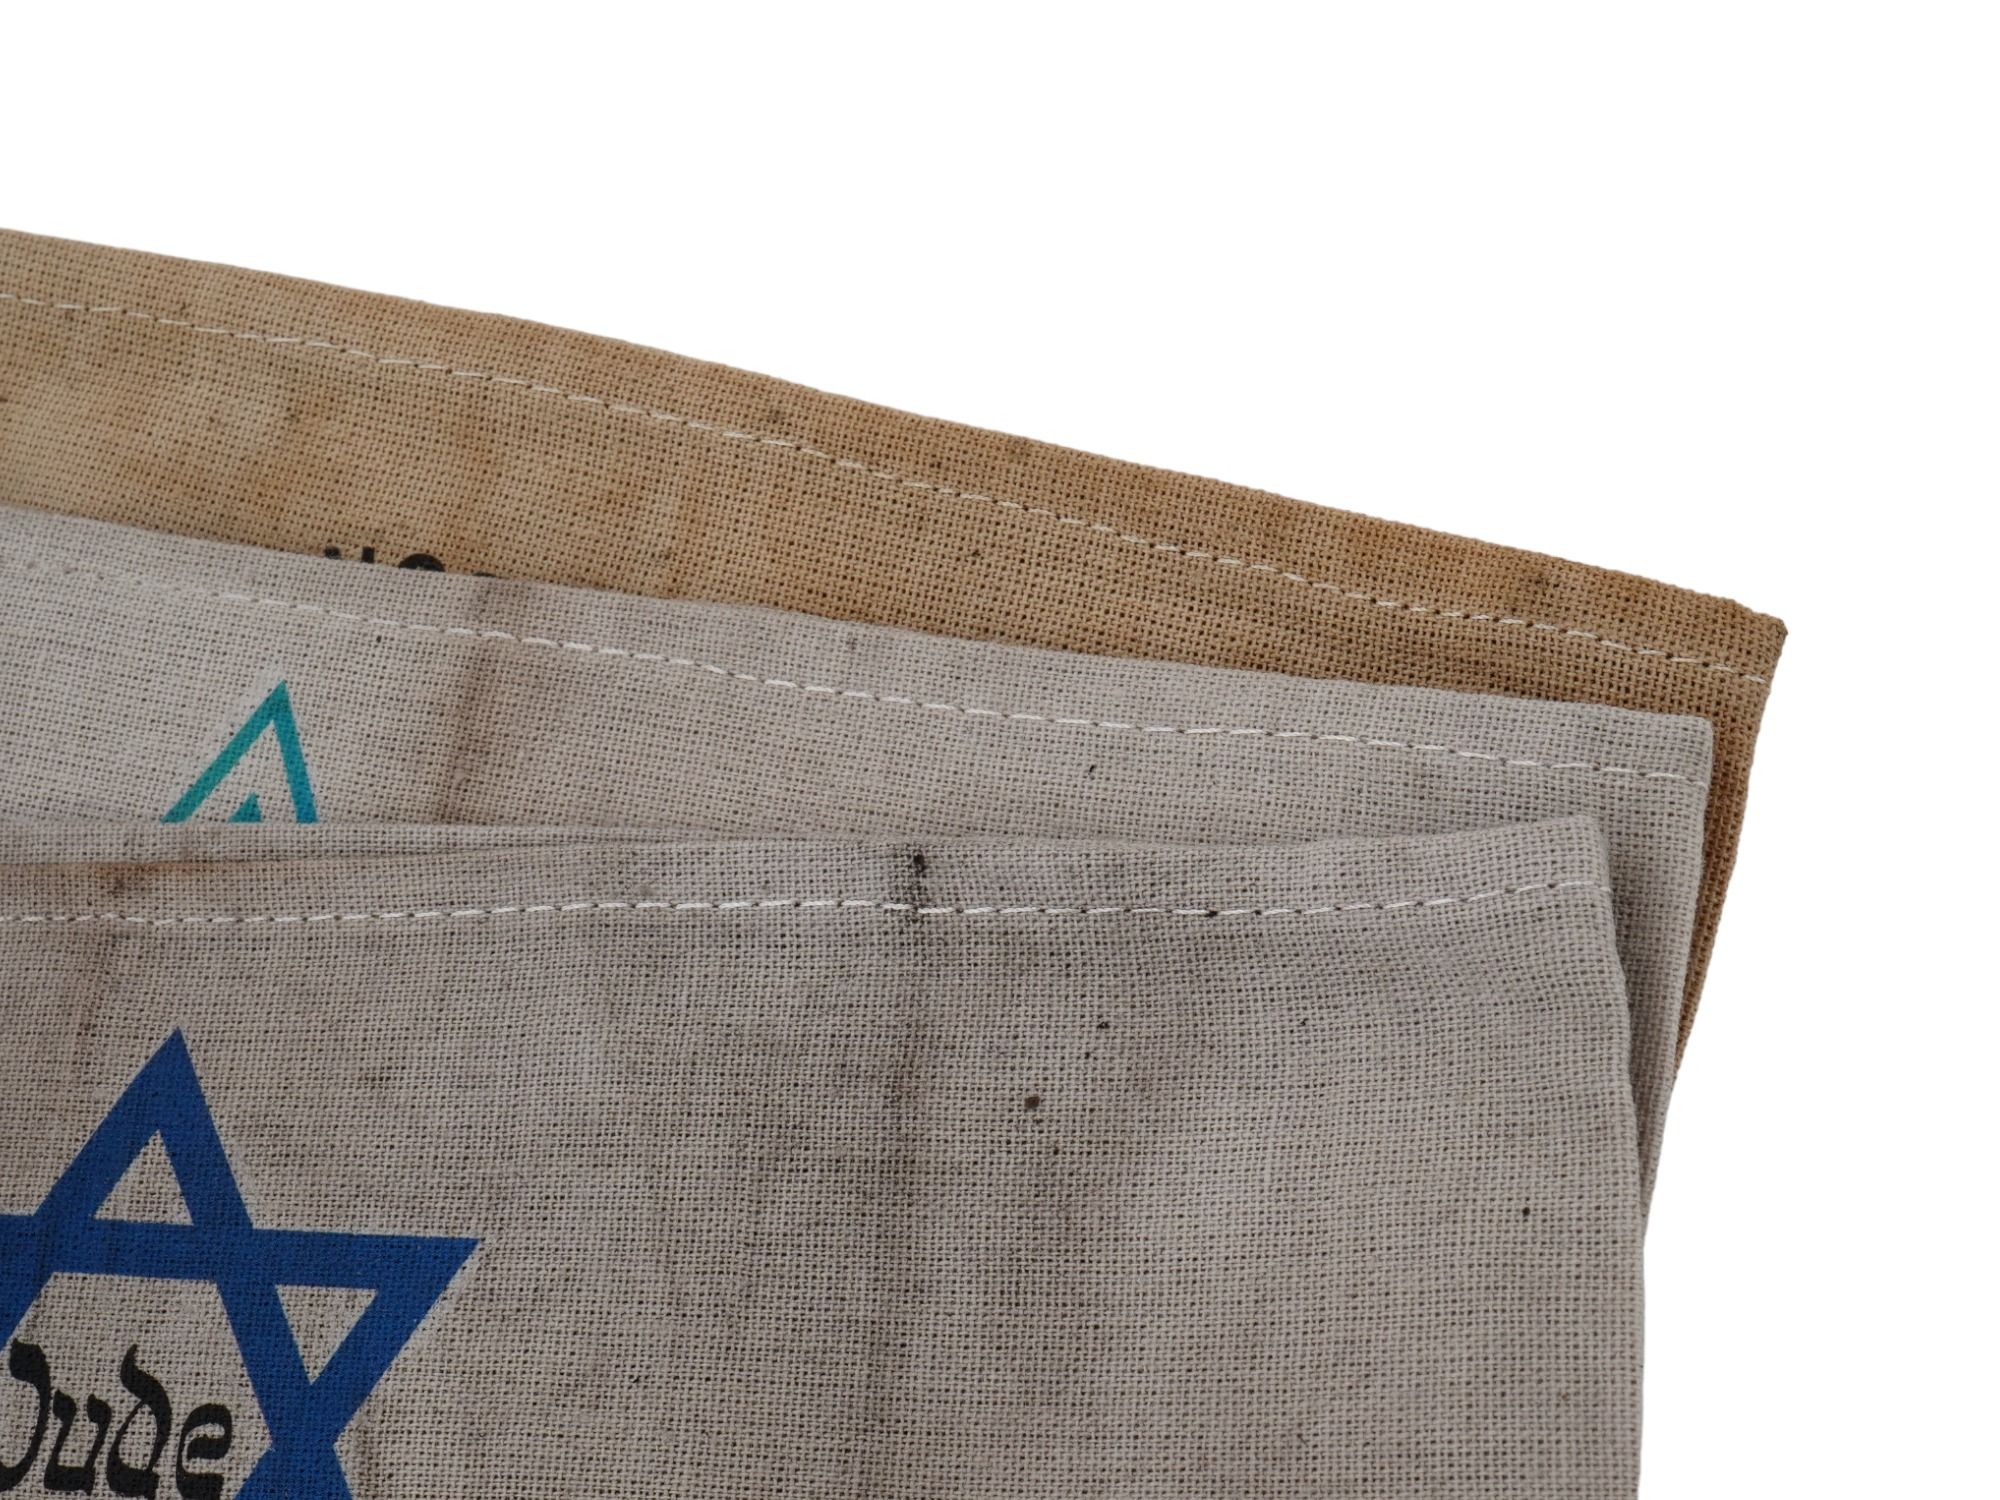 GROUP OF 3 HOLOCAUST PERIOD ARMBANDS PIC-2